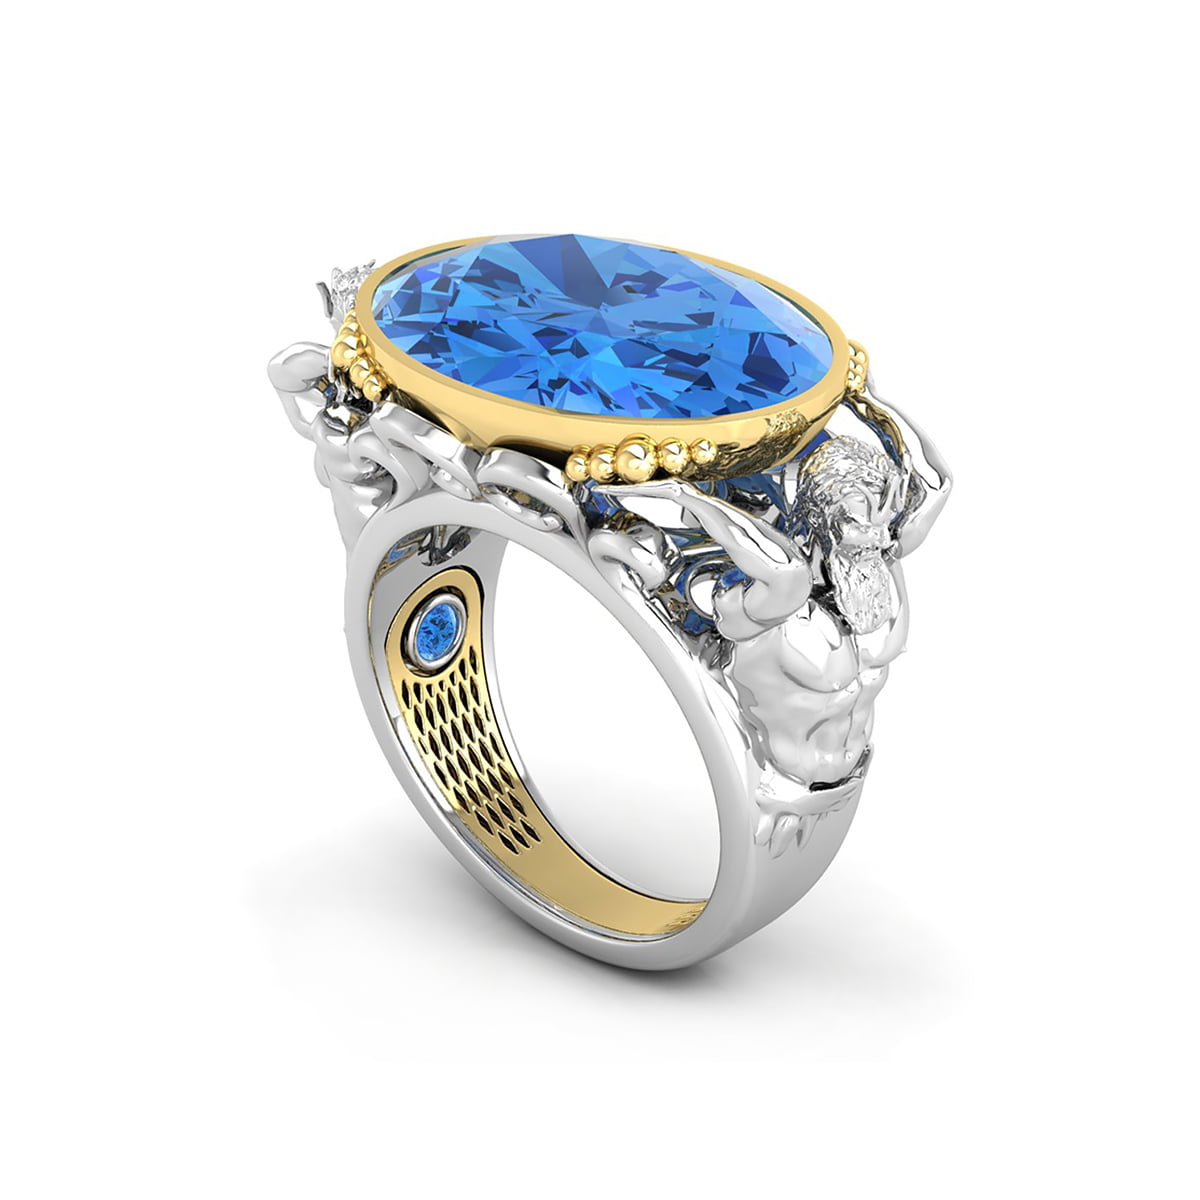 Blue Sapphire Oval Cut CZ Stone King of The Ocean Embroidered Aqua-Man Poseidon Mascot Cocktail Ring